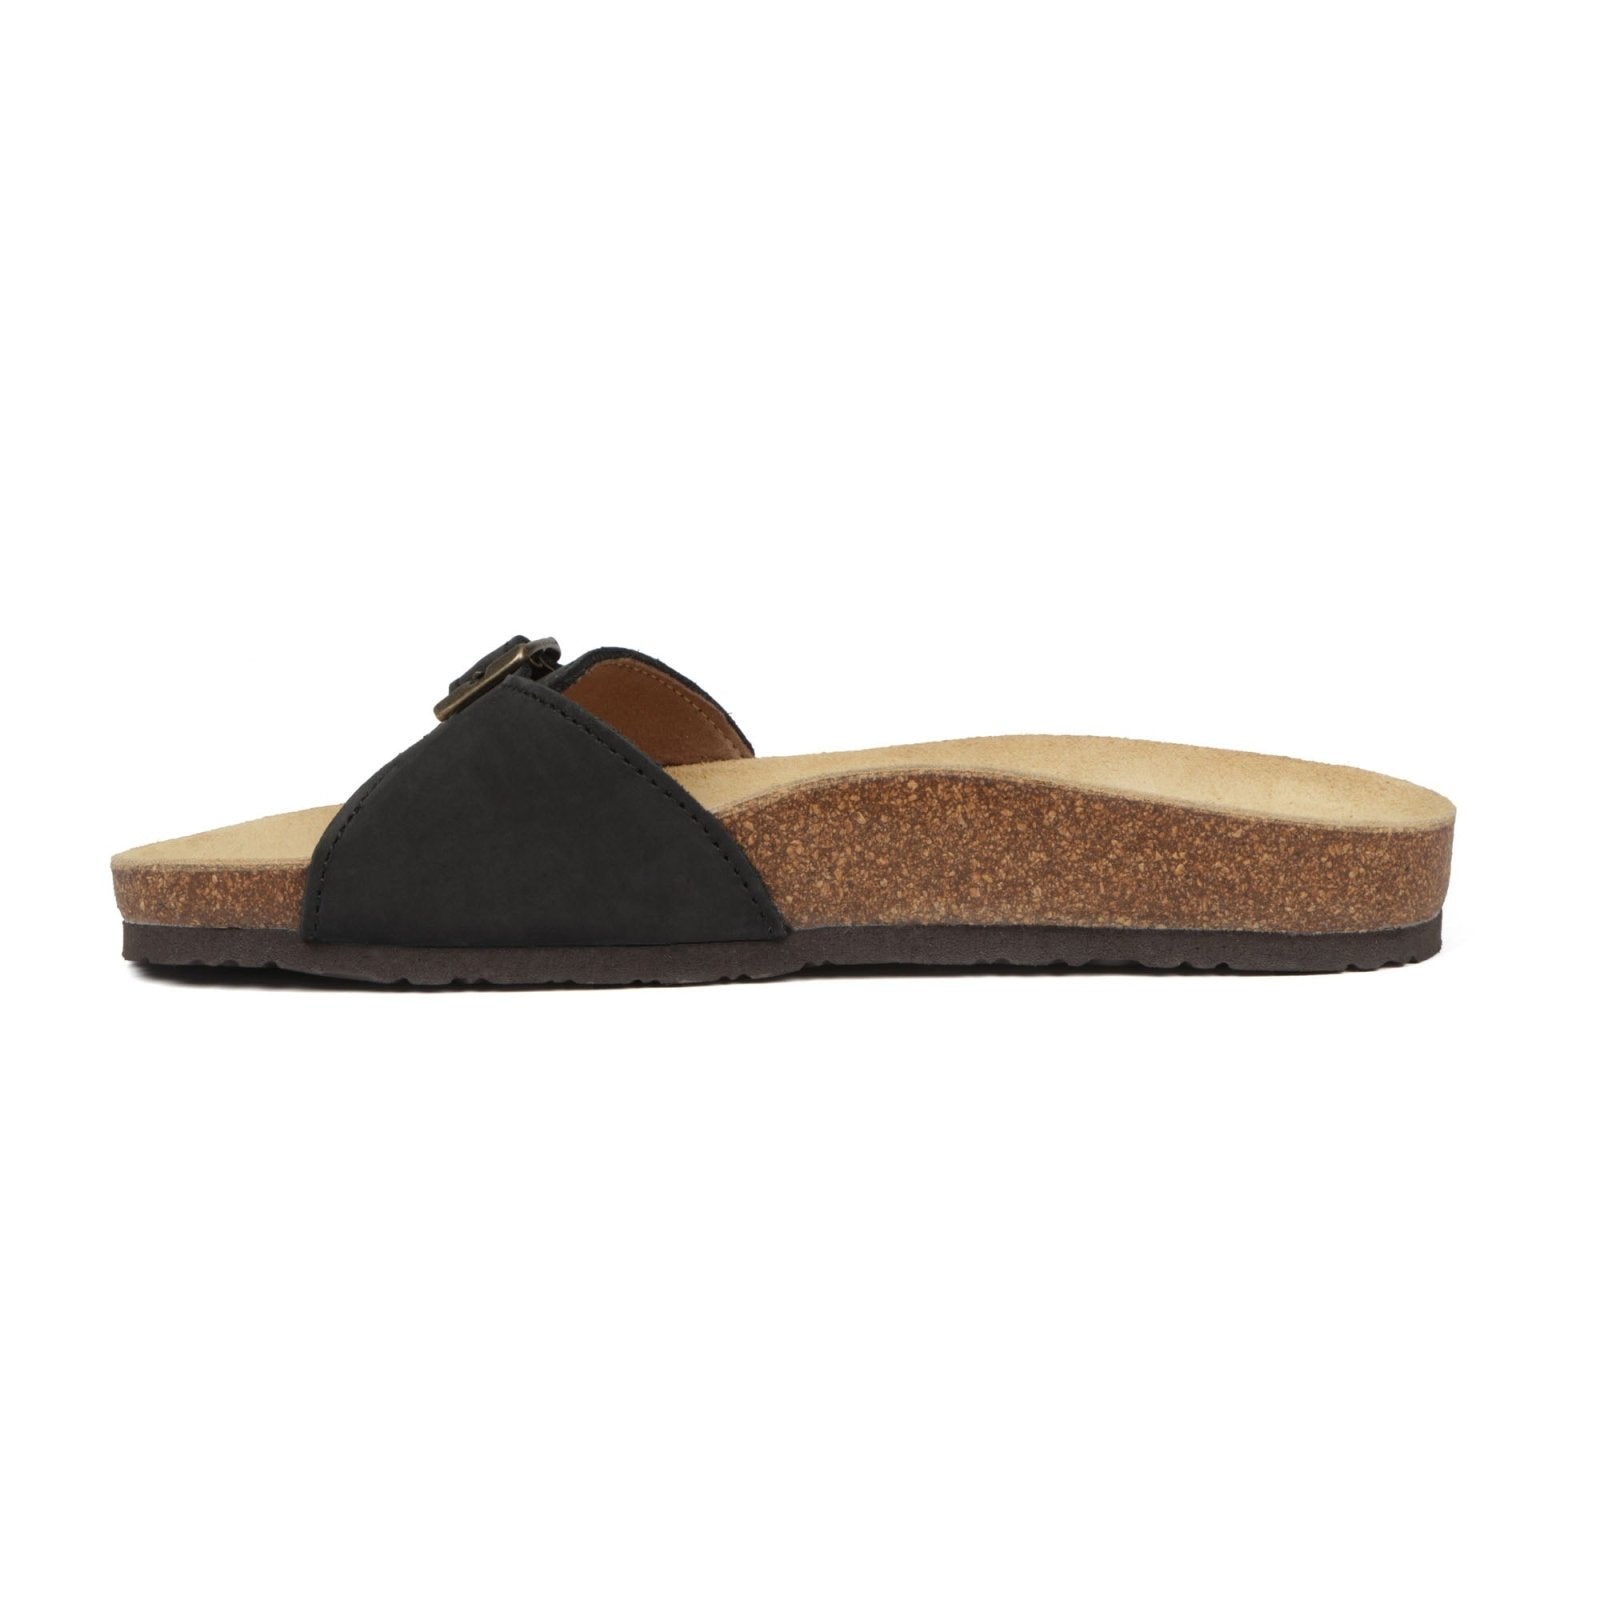 Corkies Frida Premium leather ladies sandal - Freestyle SA Proudly local Leather Goods Supplier leather boots veldskoens vellies leather shoes suede veldskoens